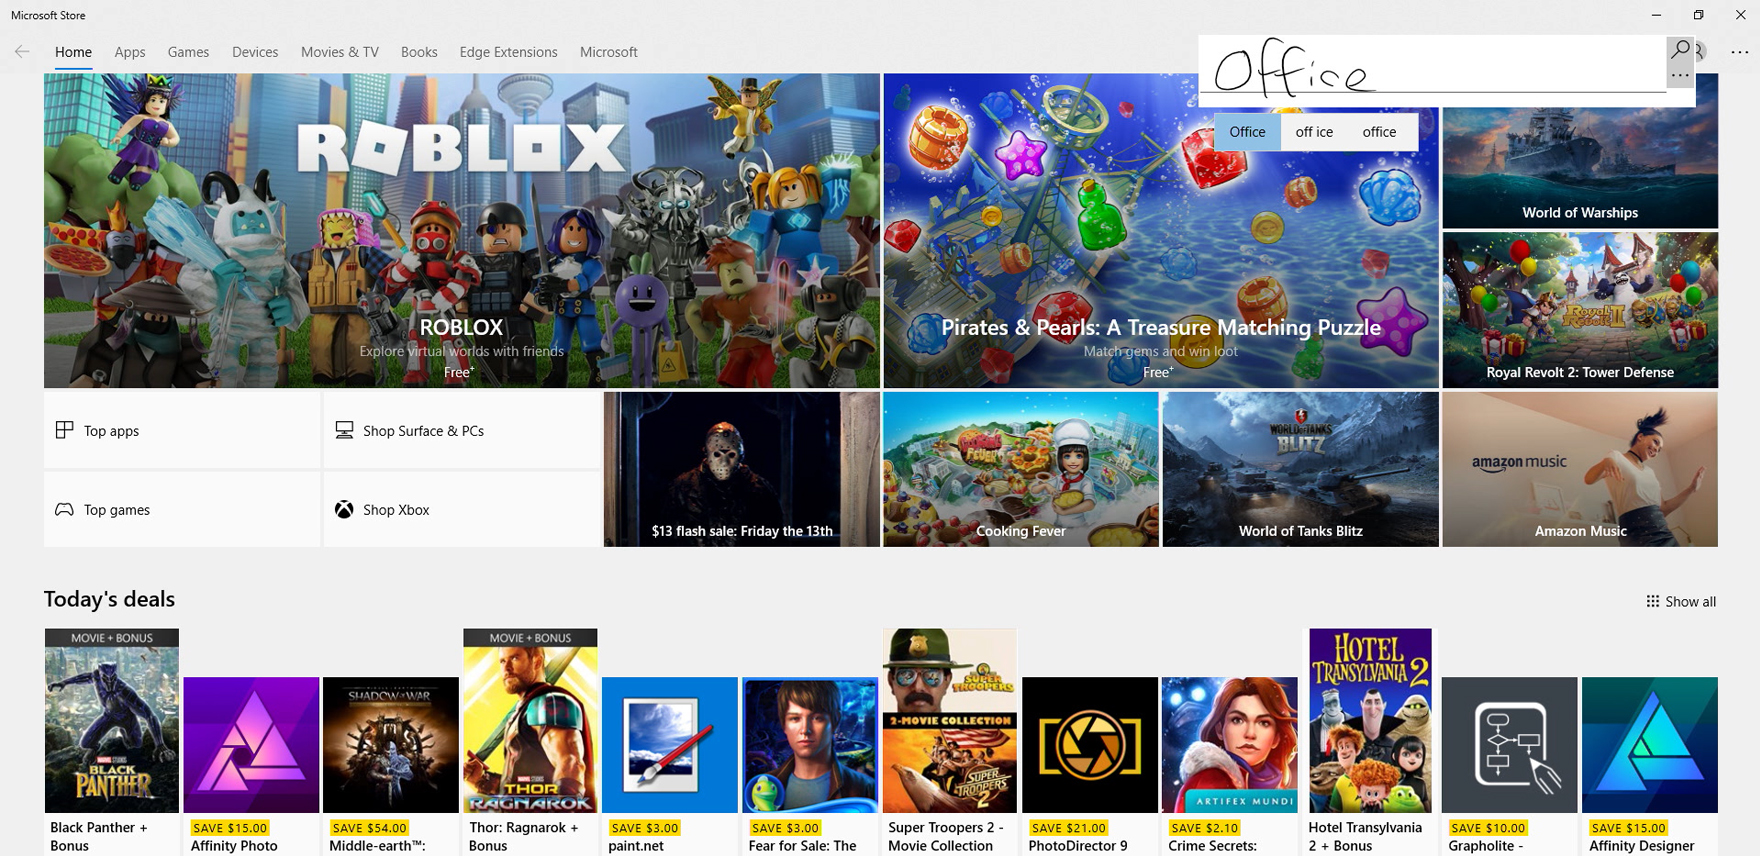 Screenshot of Microsoft Store with inking in search box